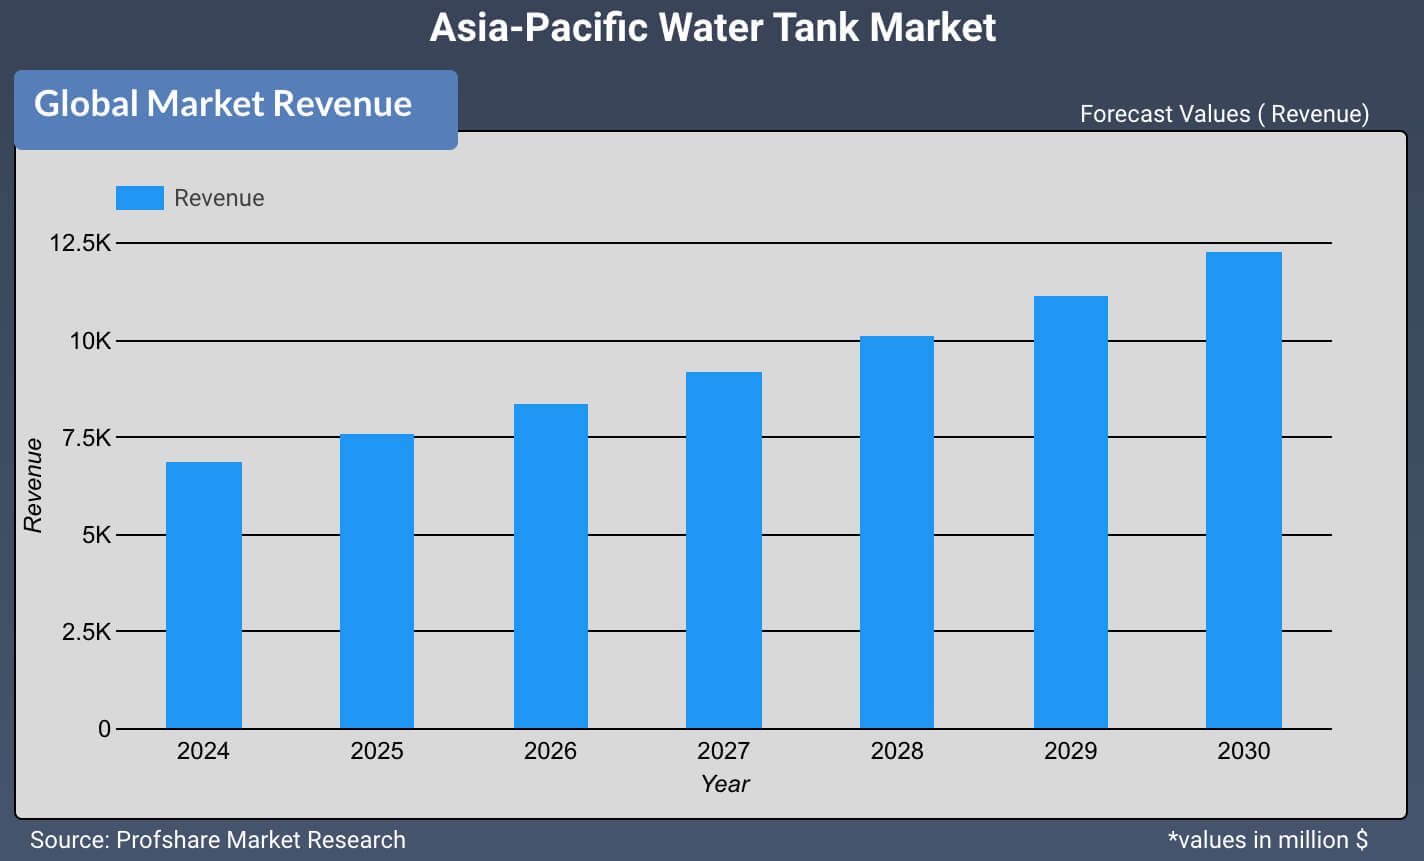 Asia-Pacific Water Tank Market